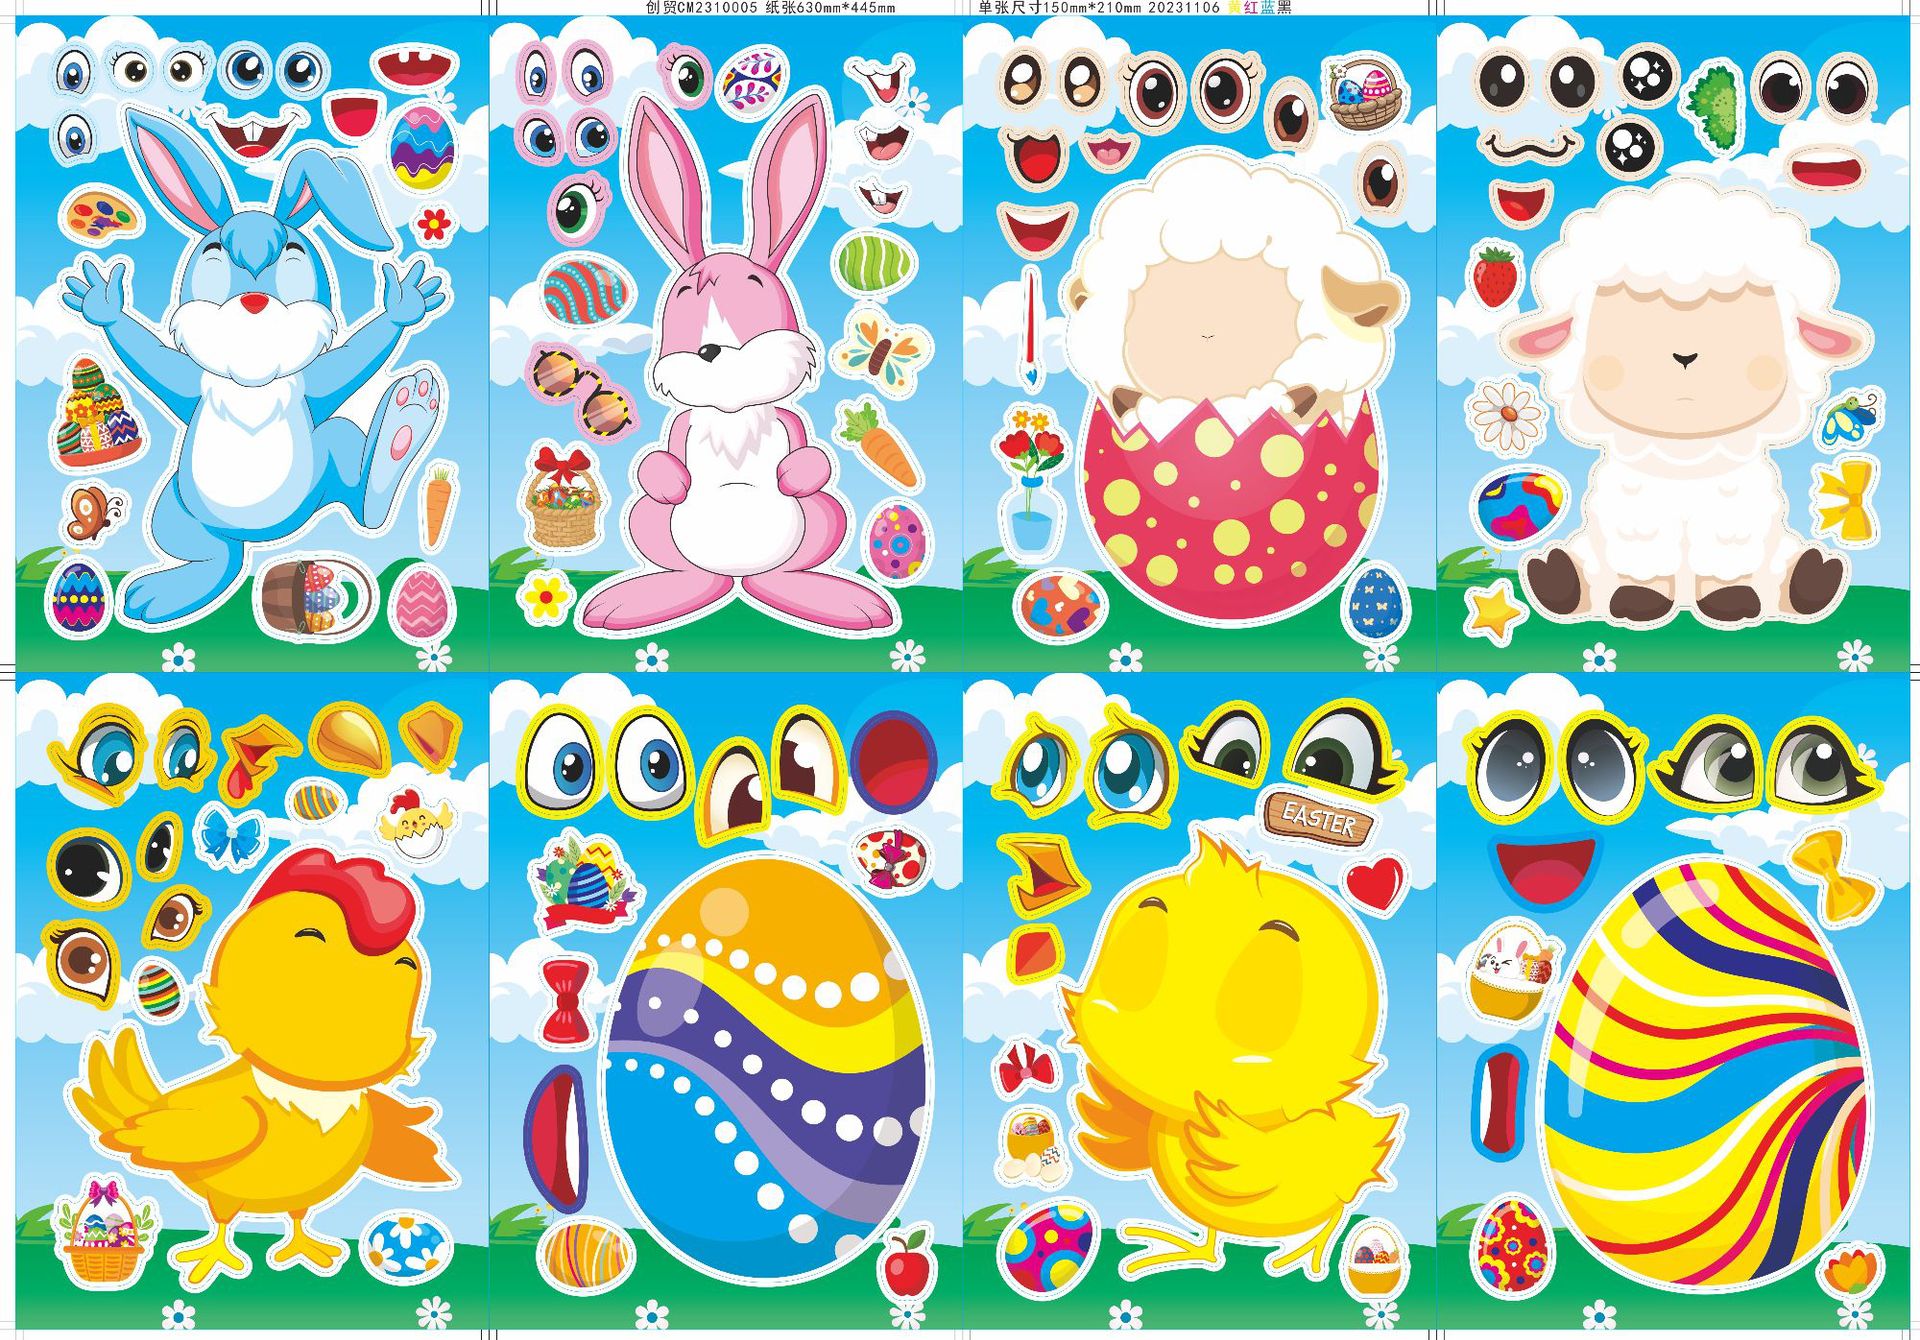 Popular Easter Stickers Children's Cartoon Cute Easter Parent-Child Puzzle DIY Face Stickers